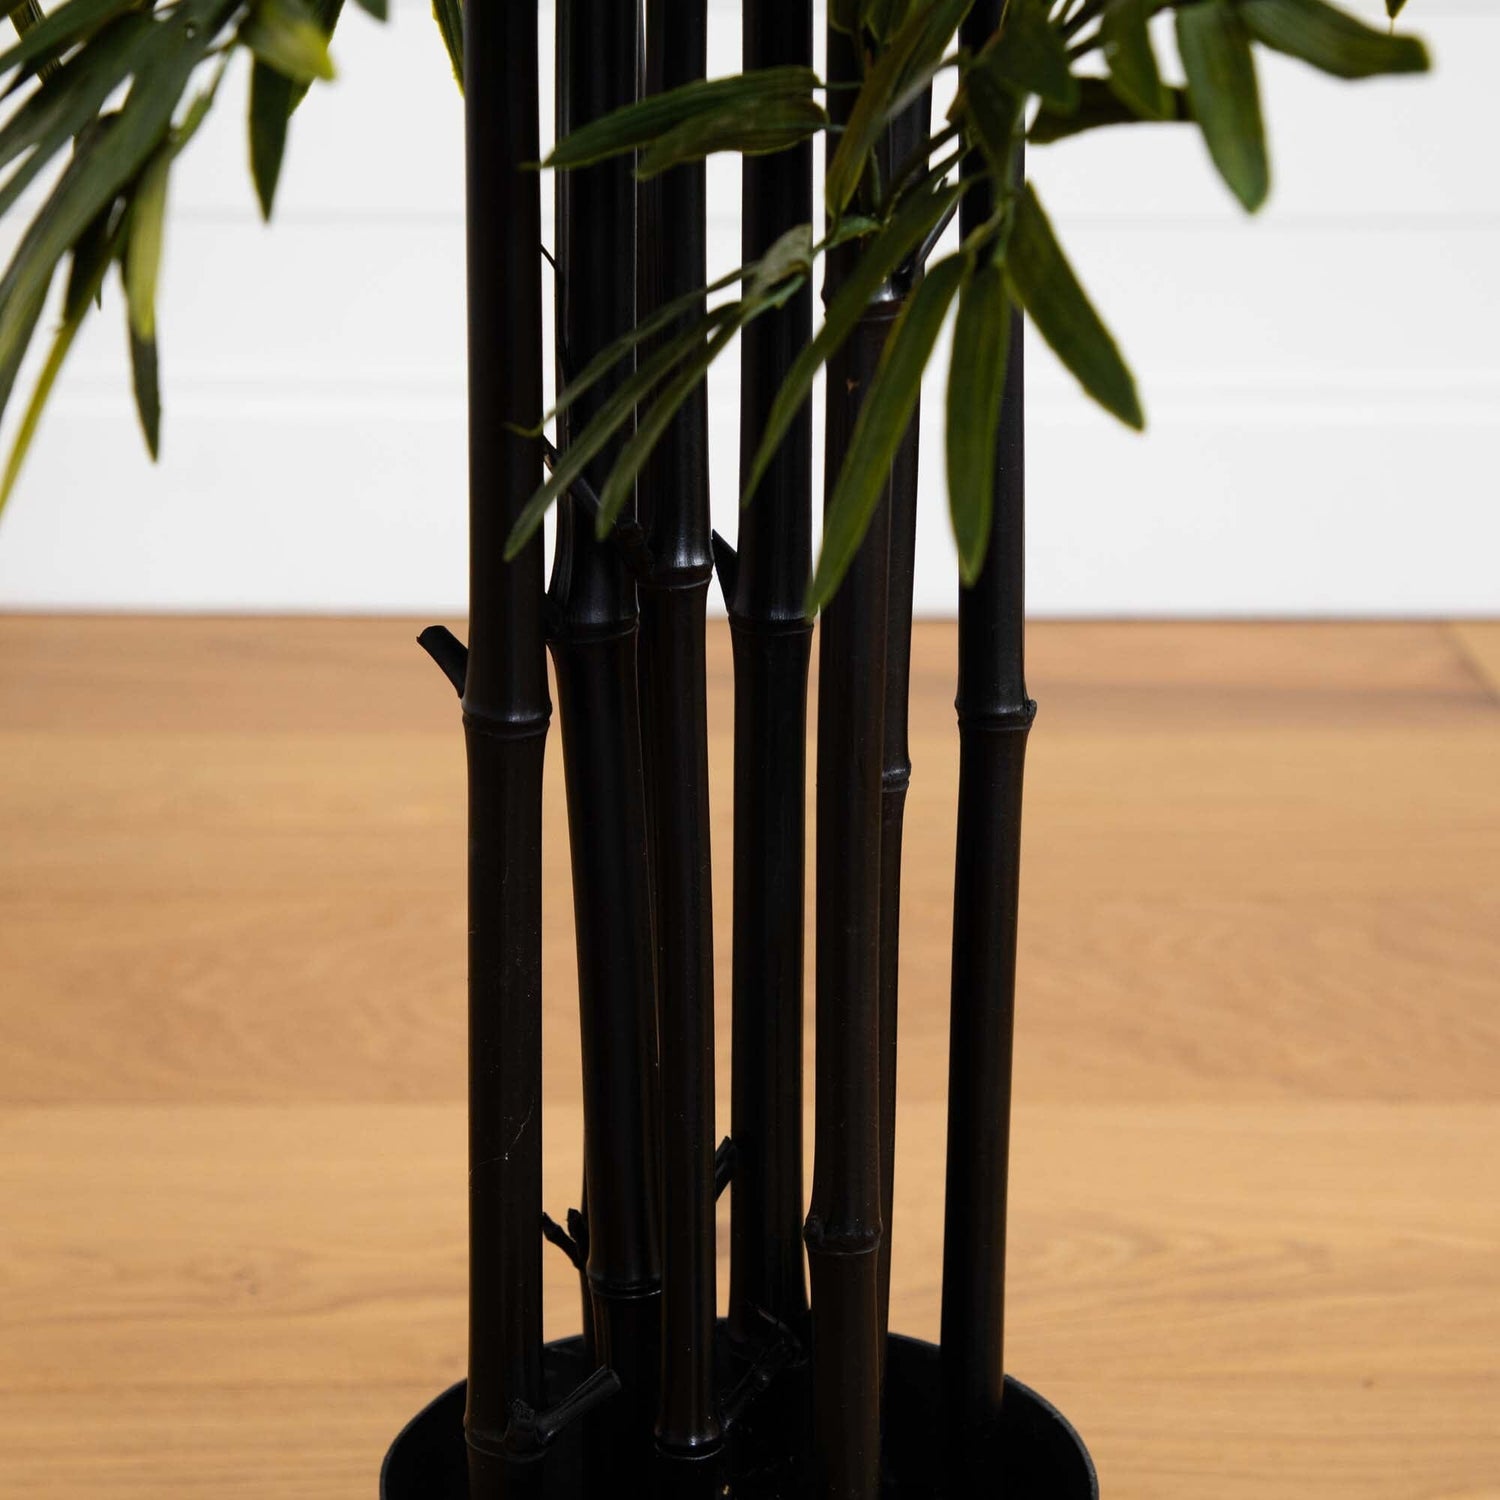 51” Bamboo Artificial Tree with Black Trunks UV Resistant (Indoor/Outdoor)